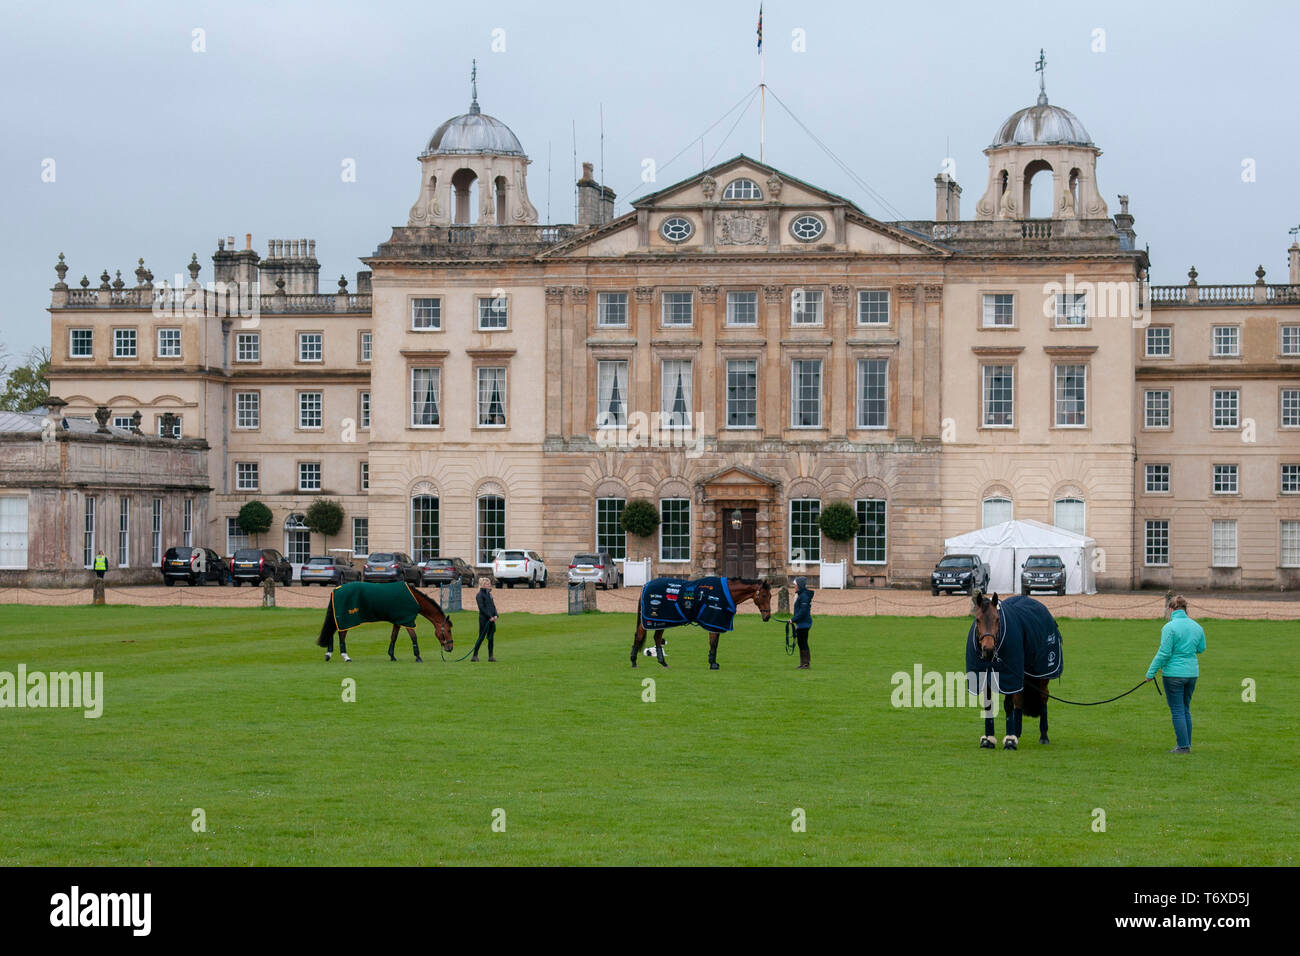 Badminton, Gloucestershire, United Kingdom, 3rd May 2019, Horses grazing in  front of Badminton House ahead of